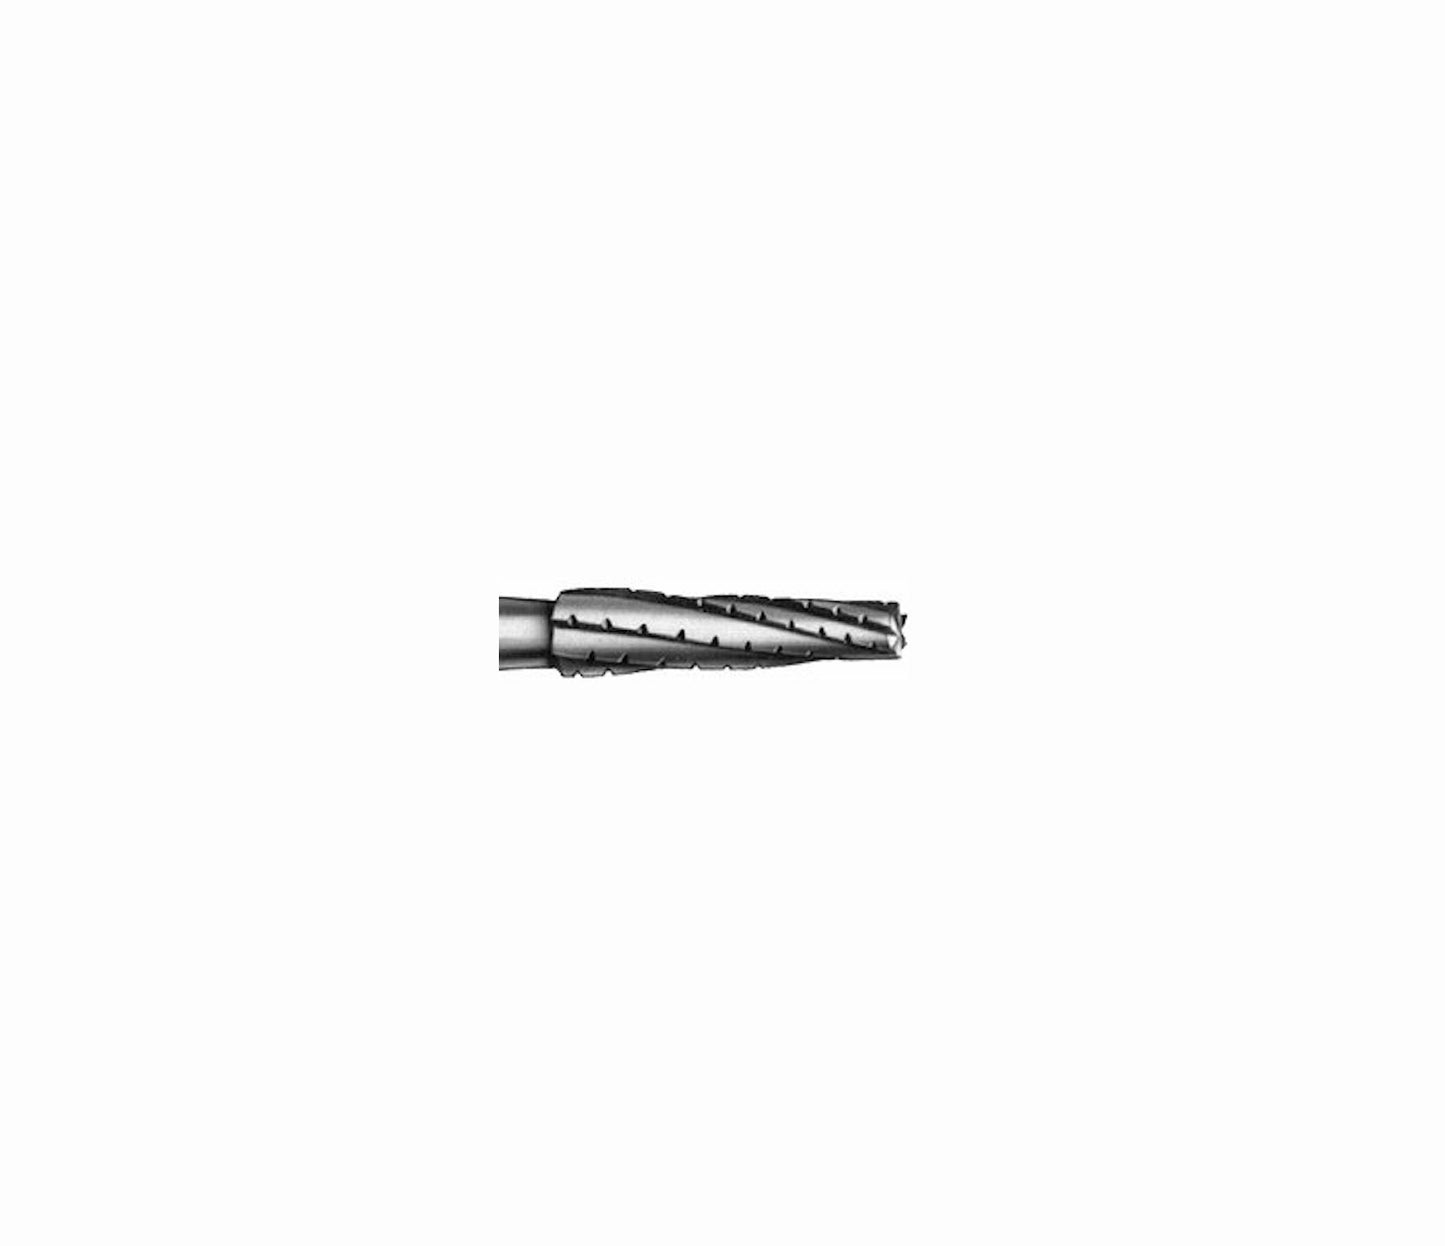 Komet #H33L- Carbide Long Tapered Cross-Cut Burr- Pack of 5 (sizes available: 0.90mm-2.10mm)